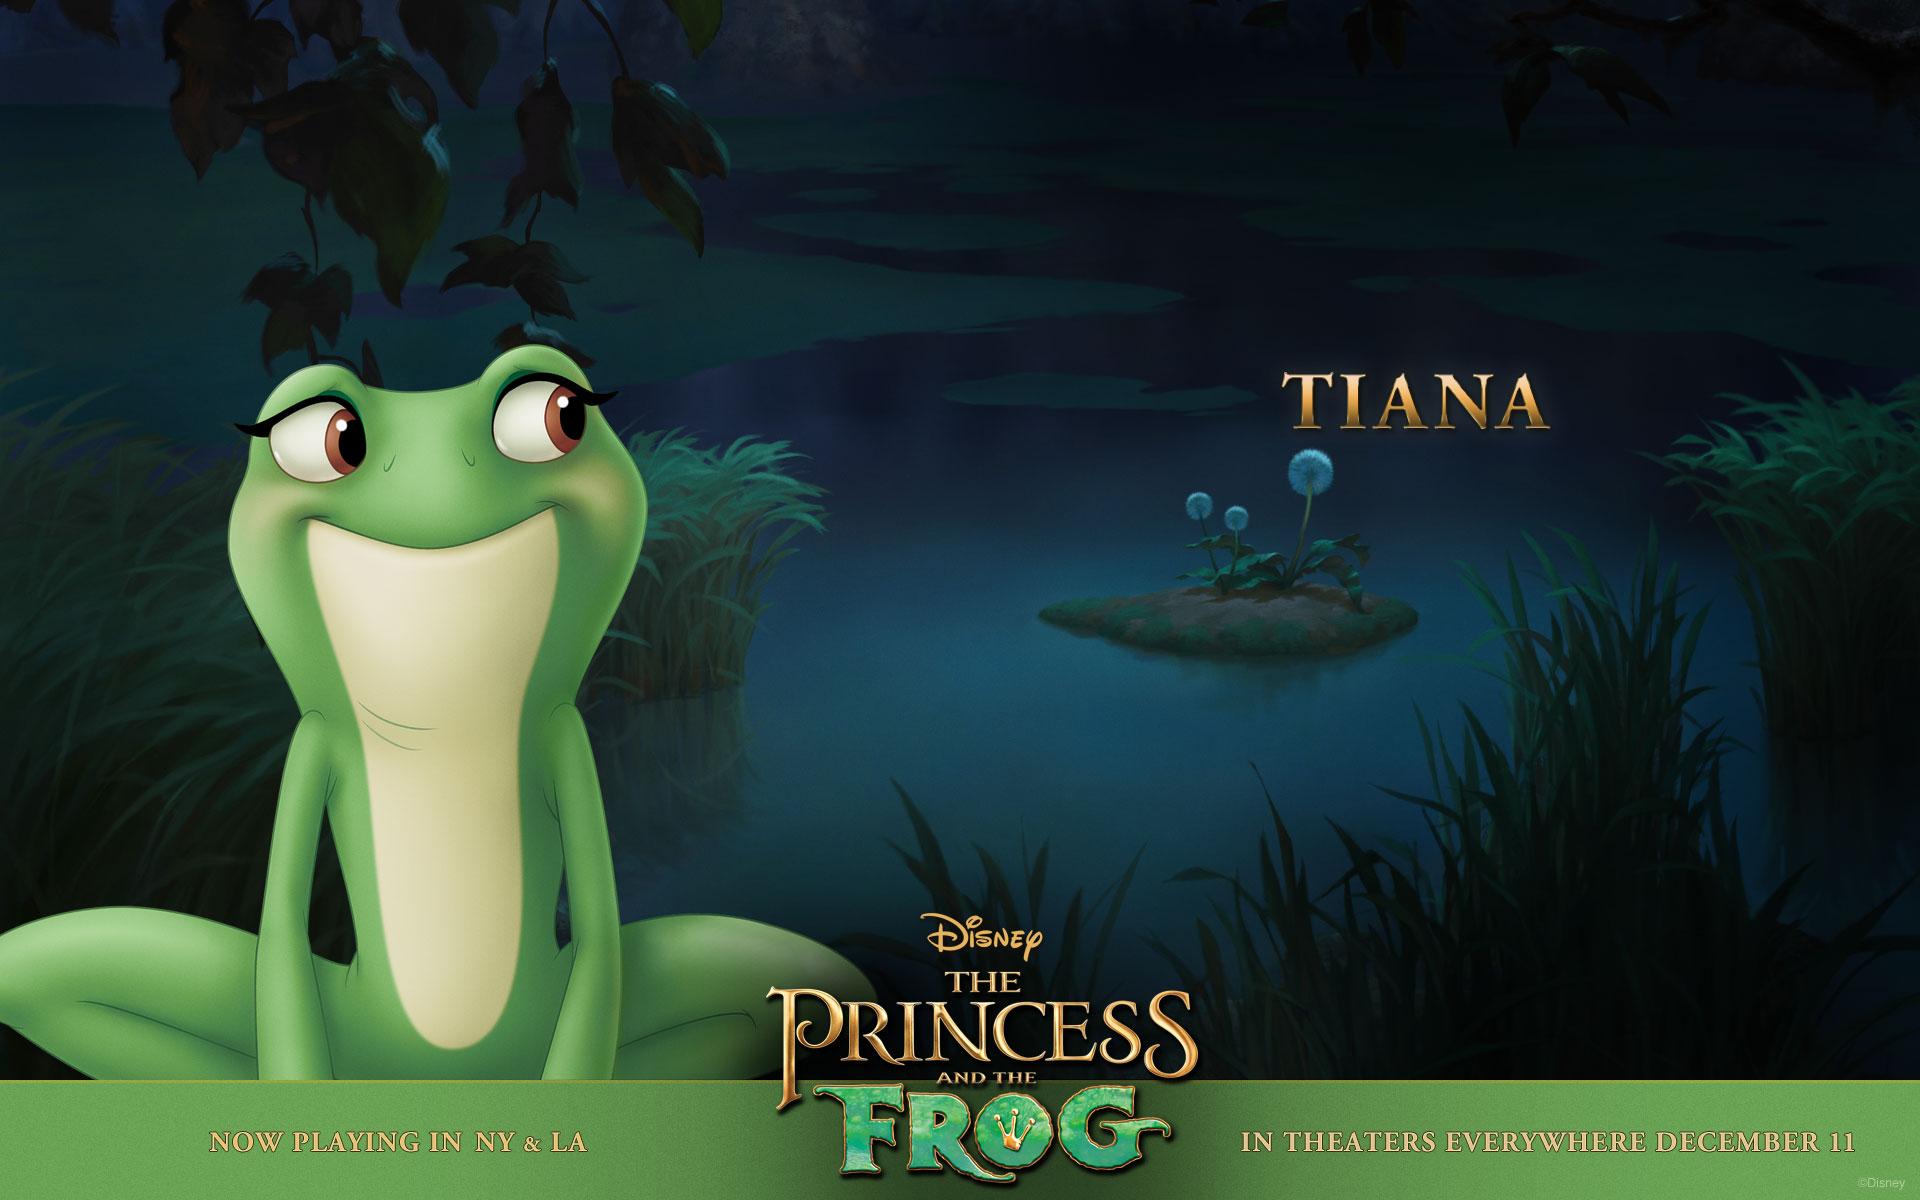 Tiana in the Bayou from Disney's Princess and the Frog Desktop Wallpaper